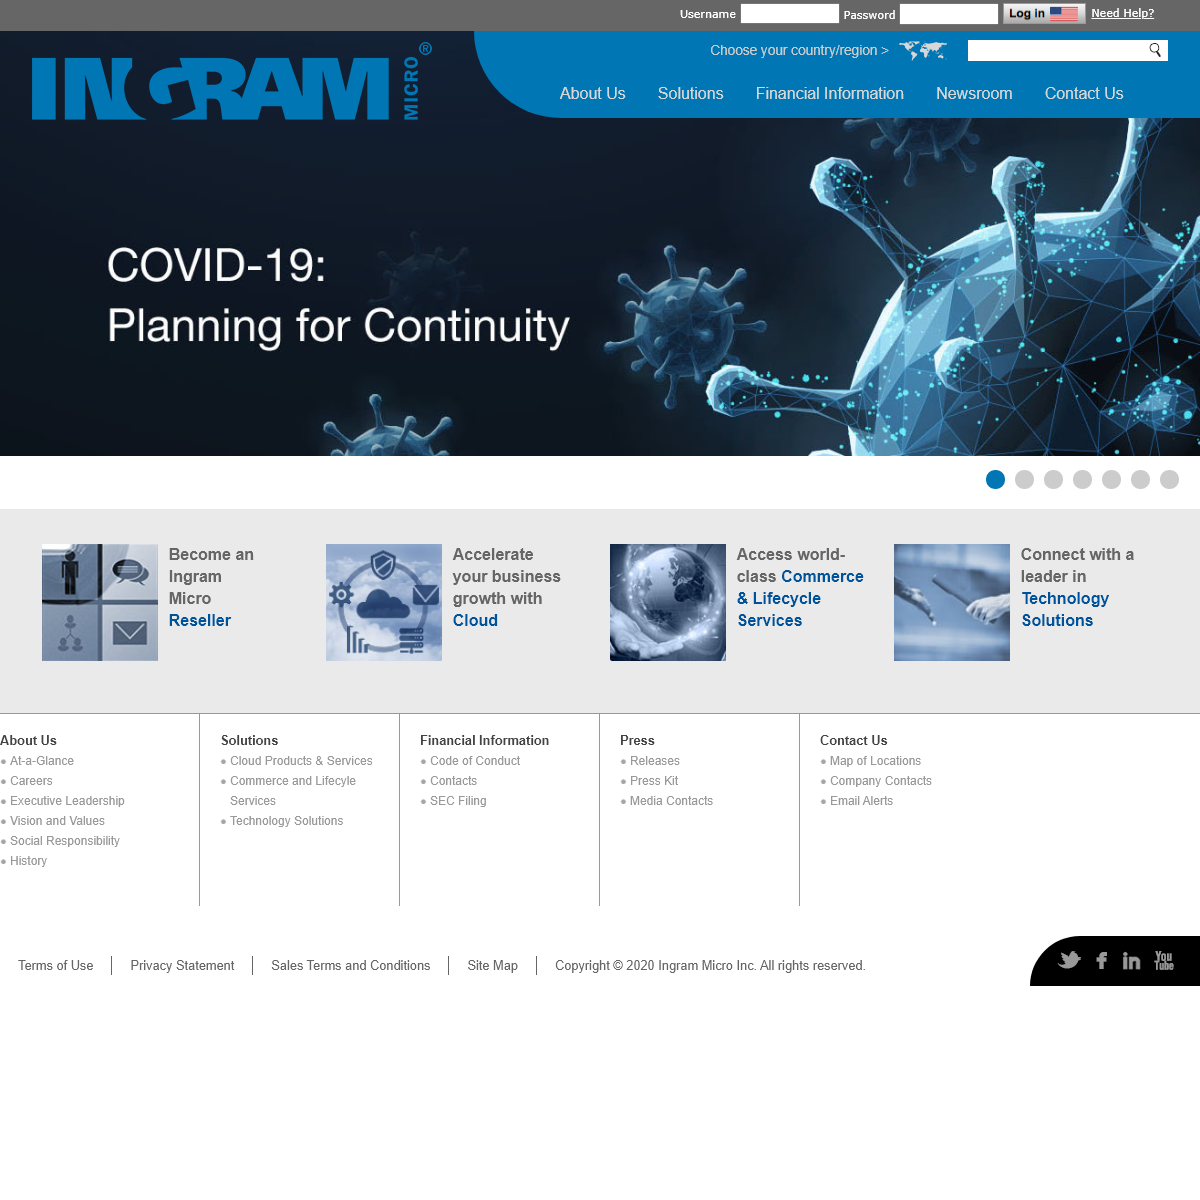 A complete backup of ingrammicro.com